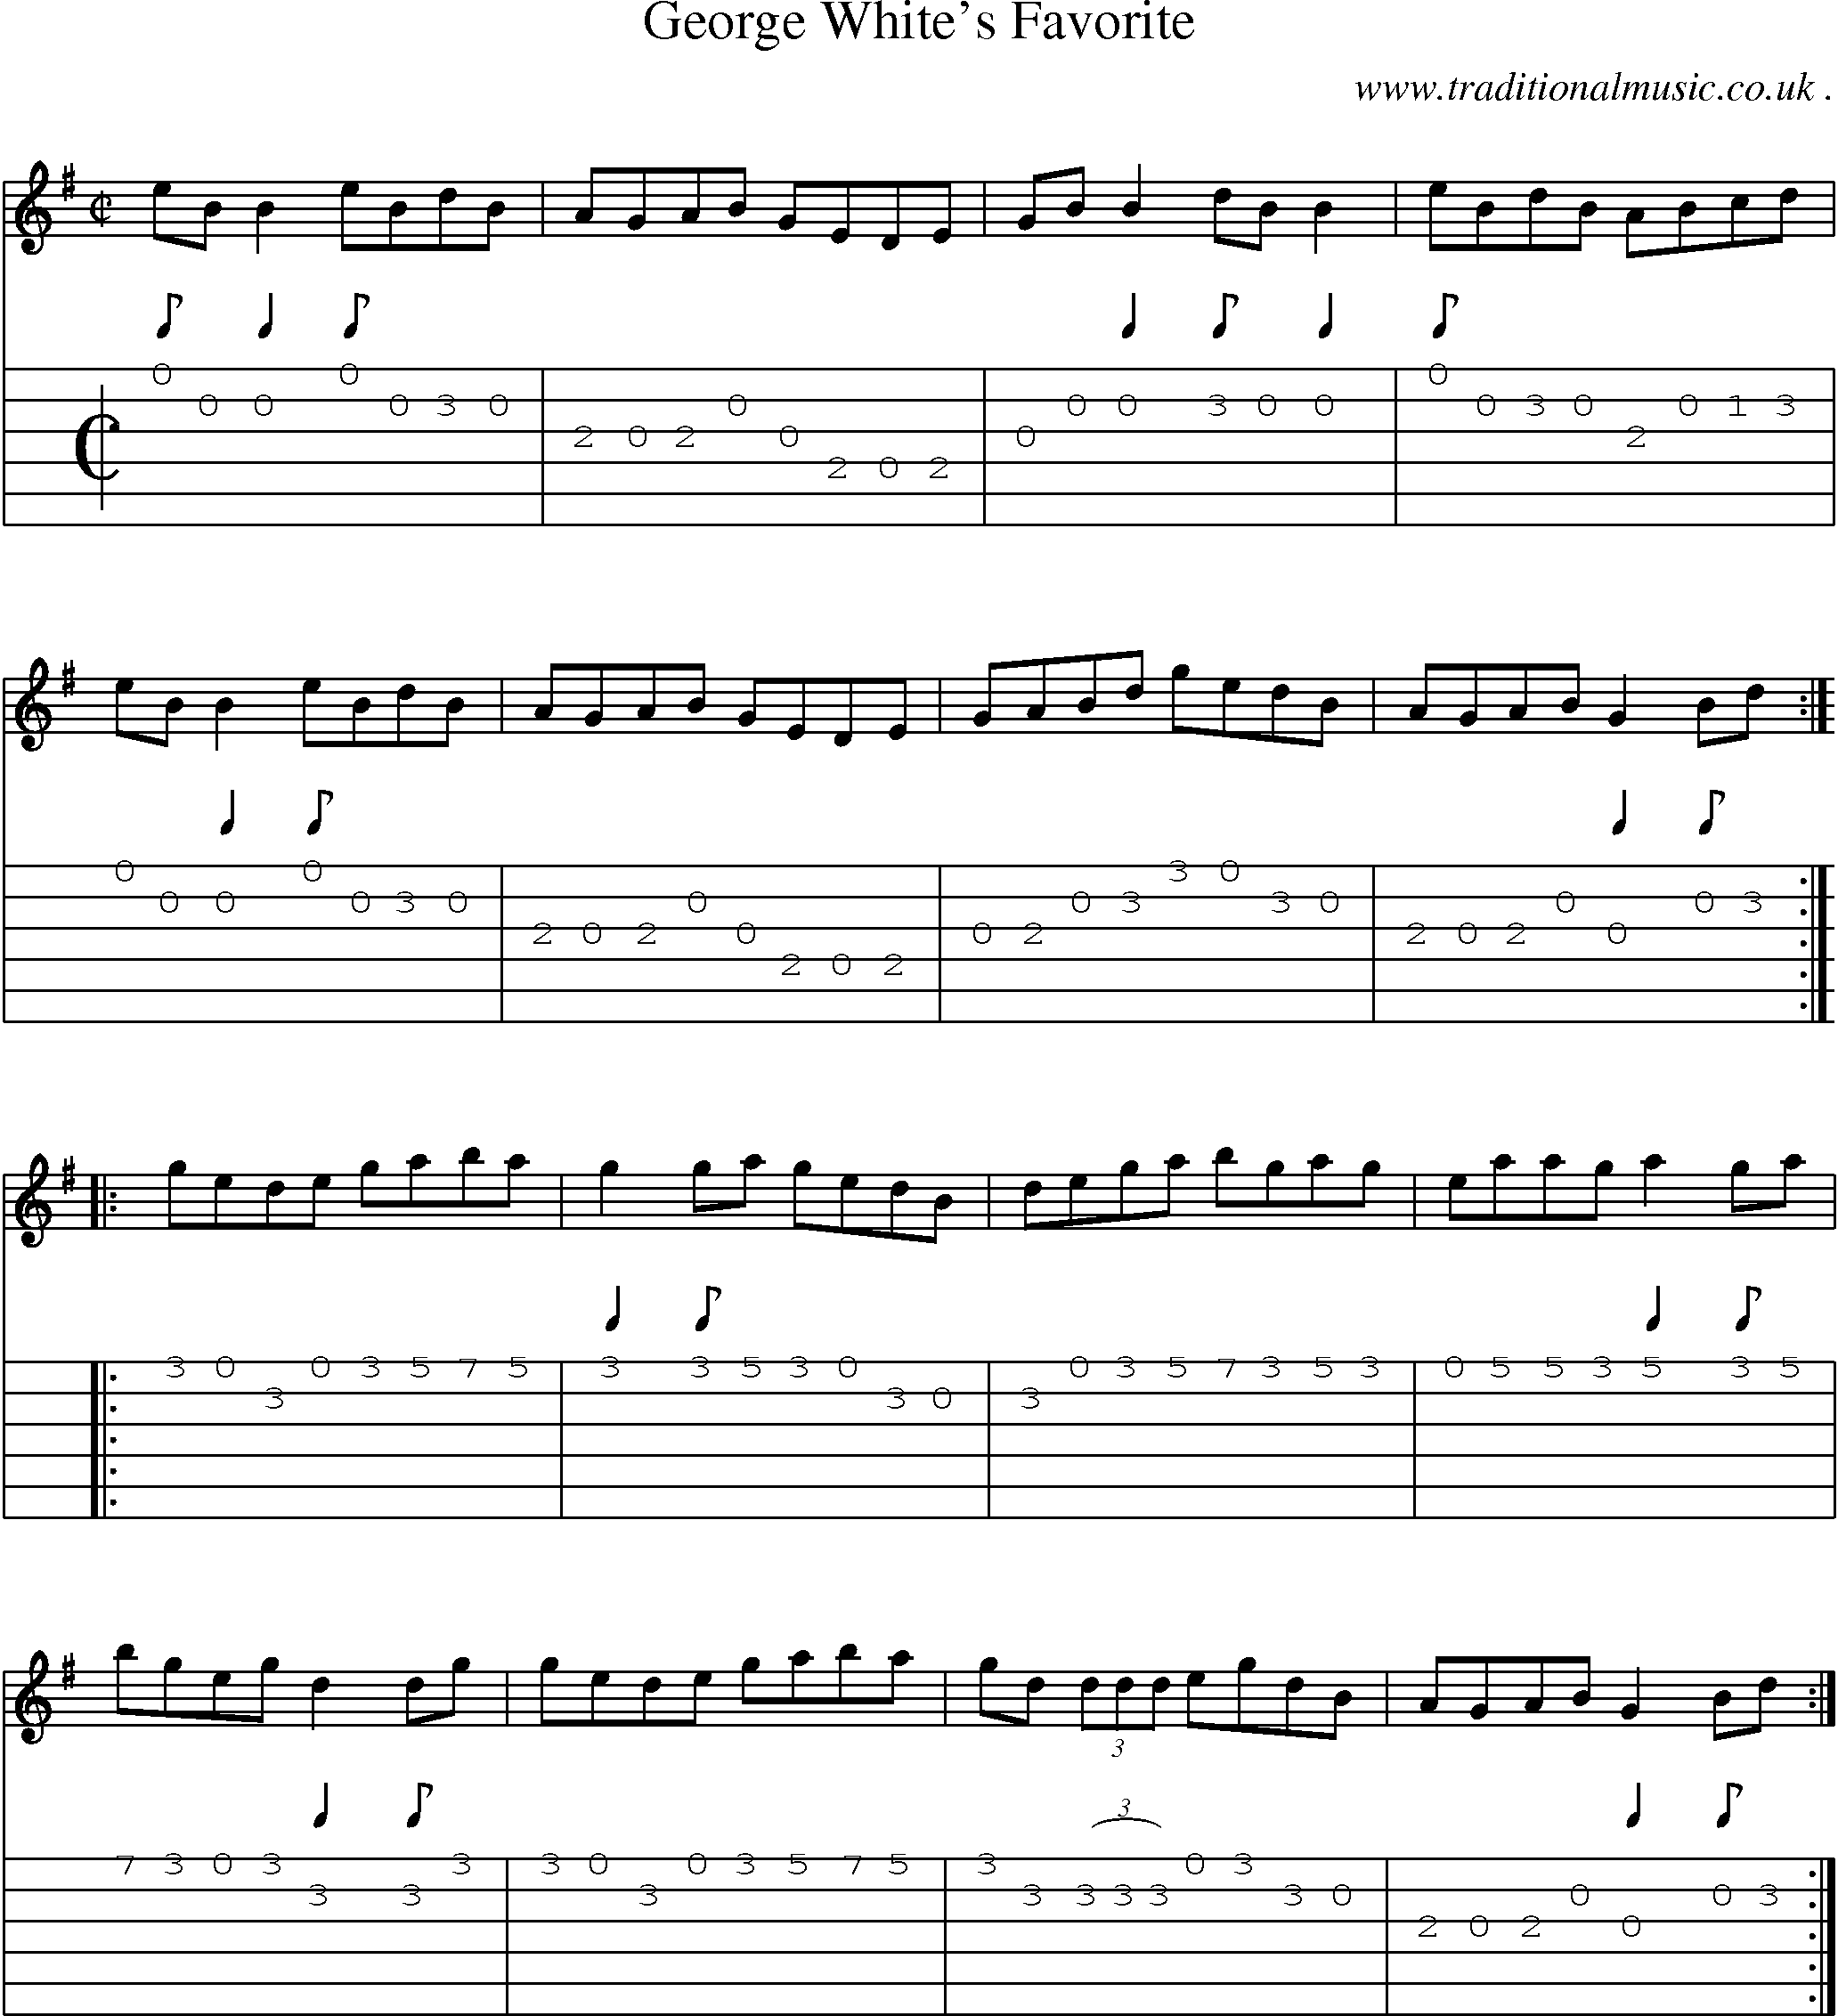 Sheet-Music and Guitar Tabs for George Whites Favorite